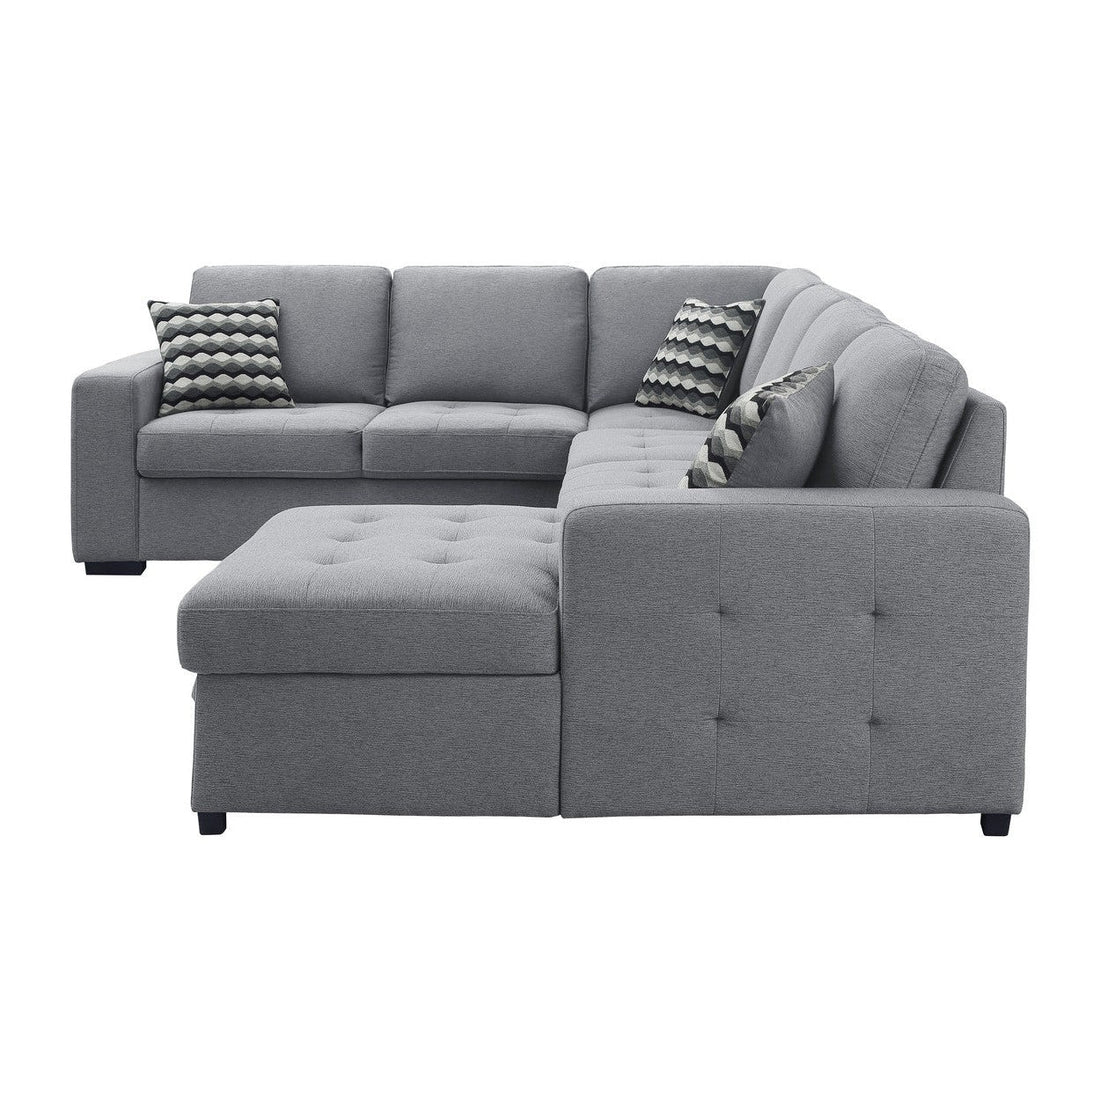 (4)4-Piece Sectional with Pull-out Bed and Hidden Storage 9313GY*42LRC